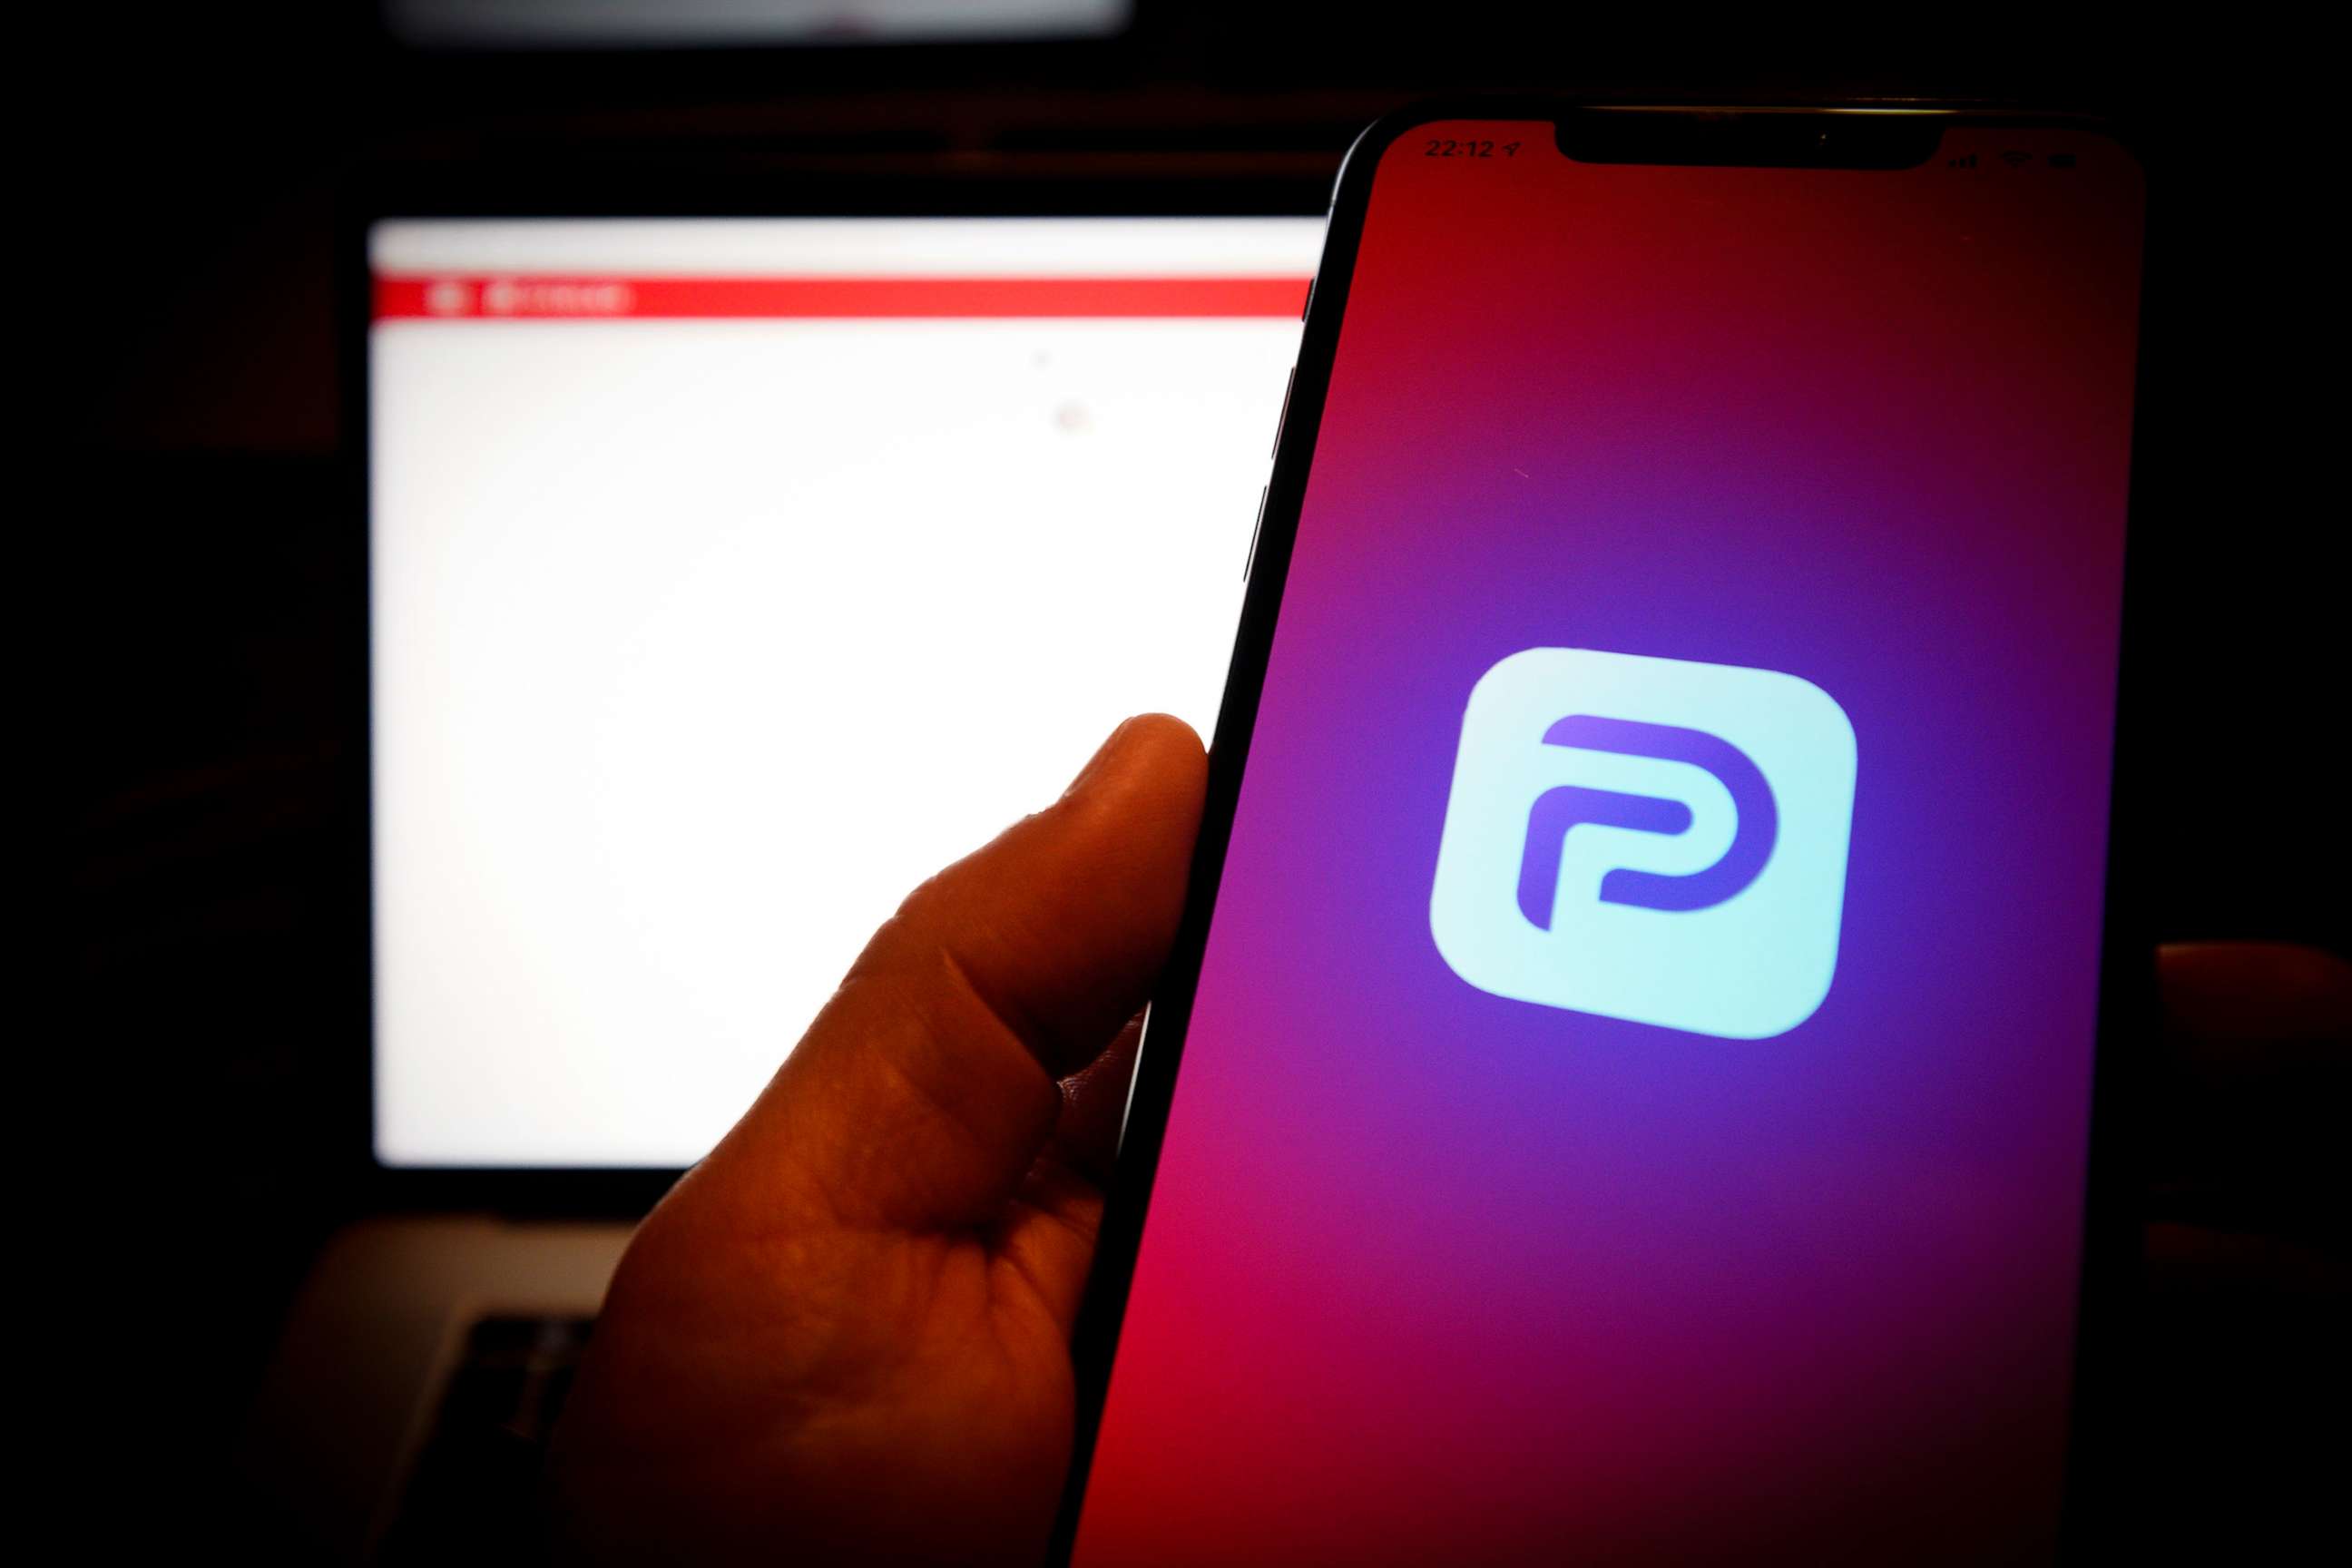 PHOTO: The Parler logo is seen on an Apple iPhone in this photo illustration on Jan, 2021. The Parler app, developed as an alternative social media platform for conservatives has been taken from the Apple App Store and the Google Play store.